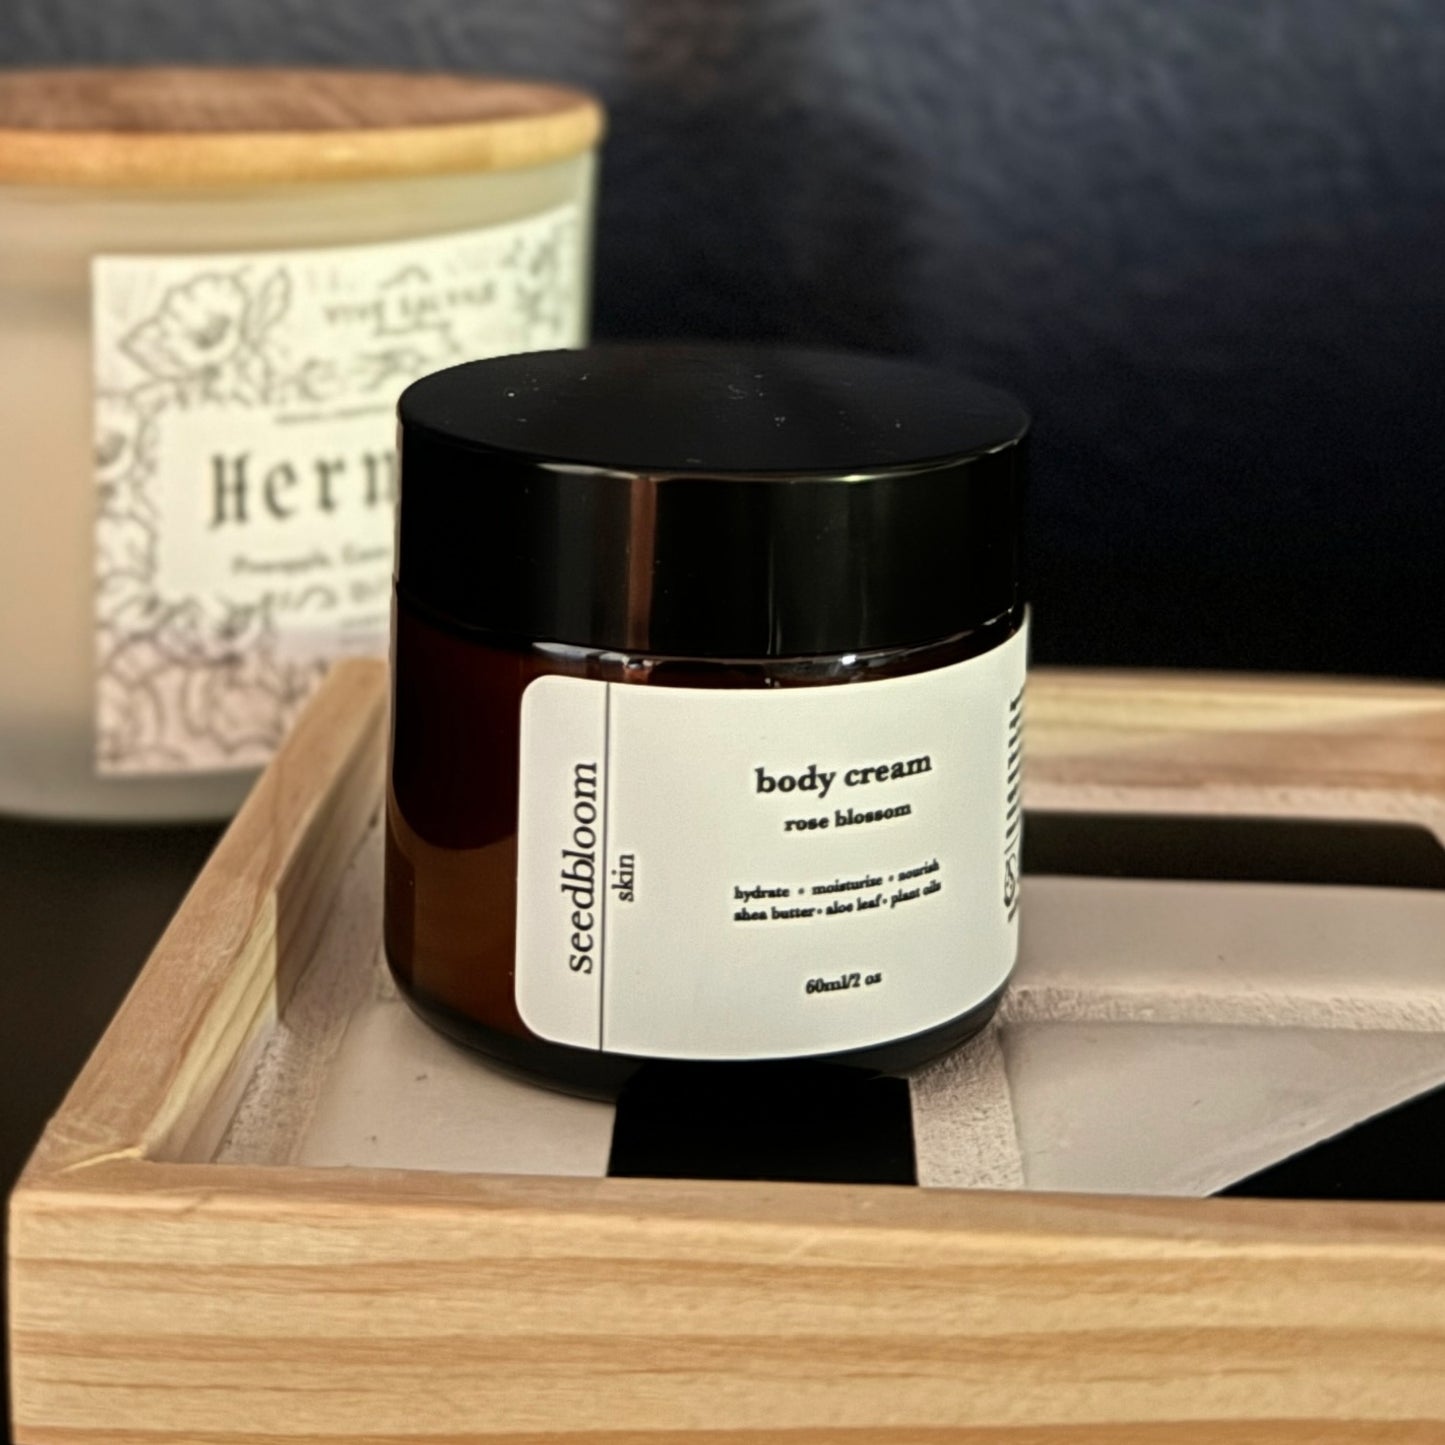 The seedbloom body lotion on the tile tray with the candle in the background